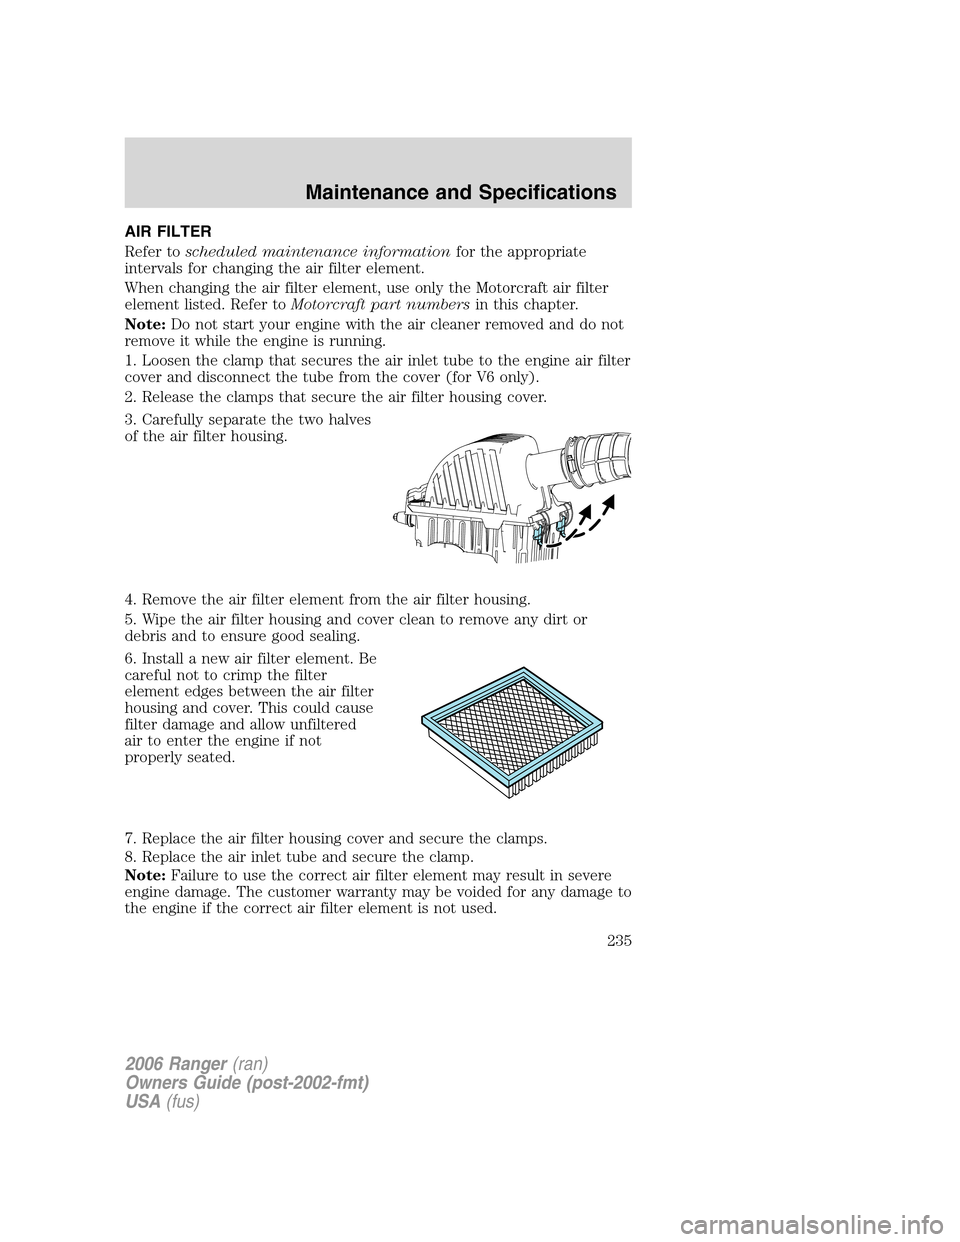 FORD RANGER 2006 2.G Owners Manual AIR FILTER
Refer toscheduled maintenance informationfor the appropriate
intervals for changing the air filter element.
When changing the air filter element, use only the Motorcraft air filter
element 